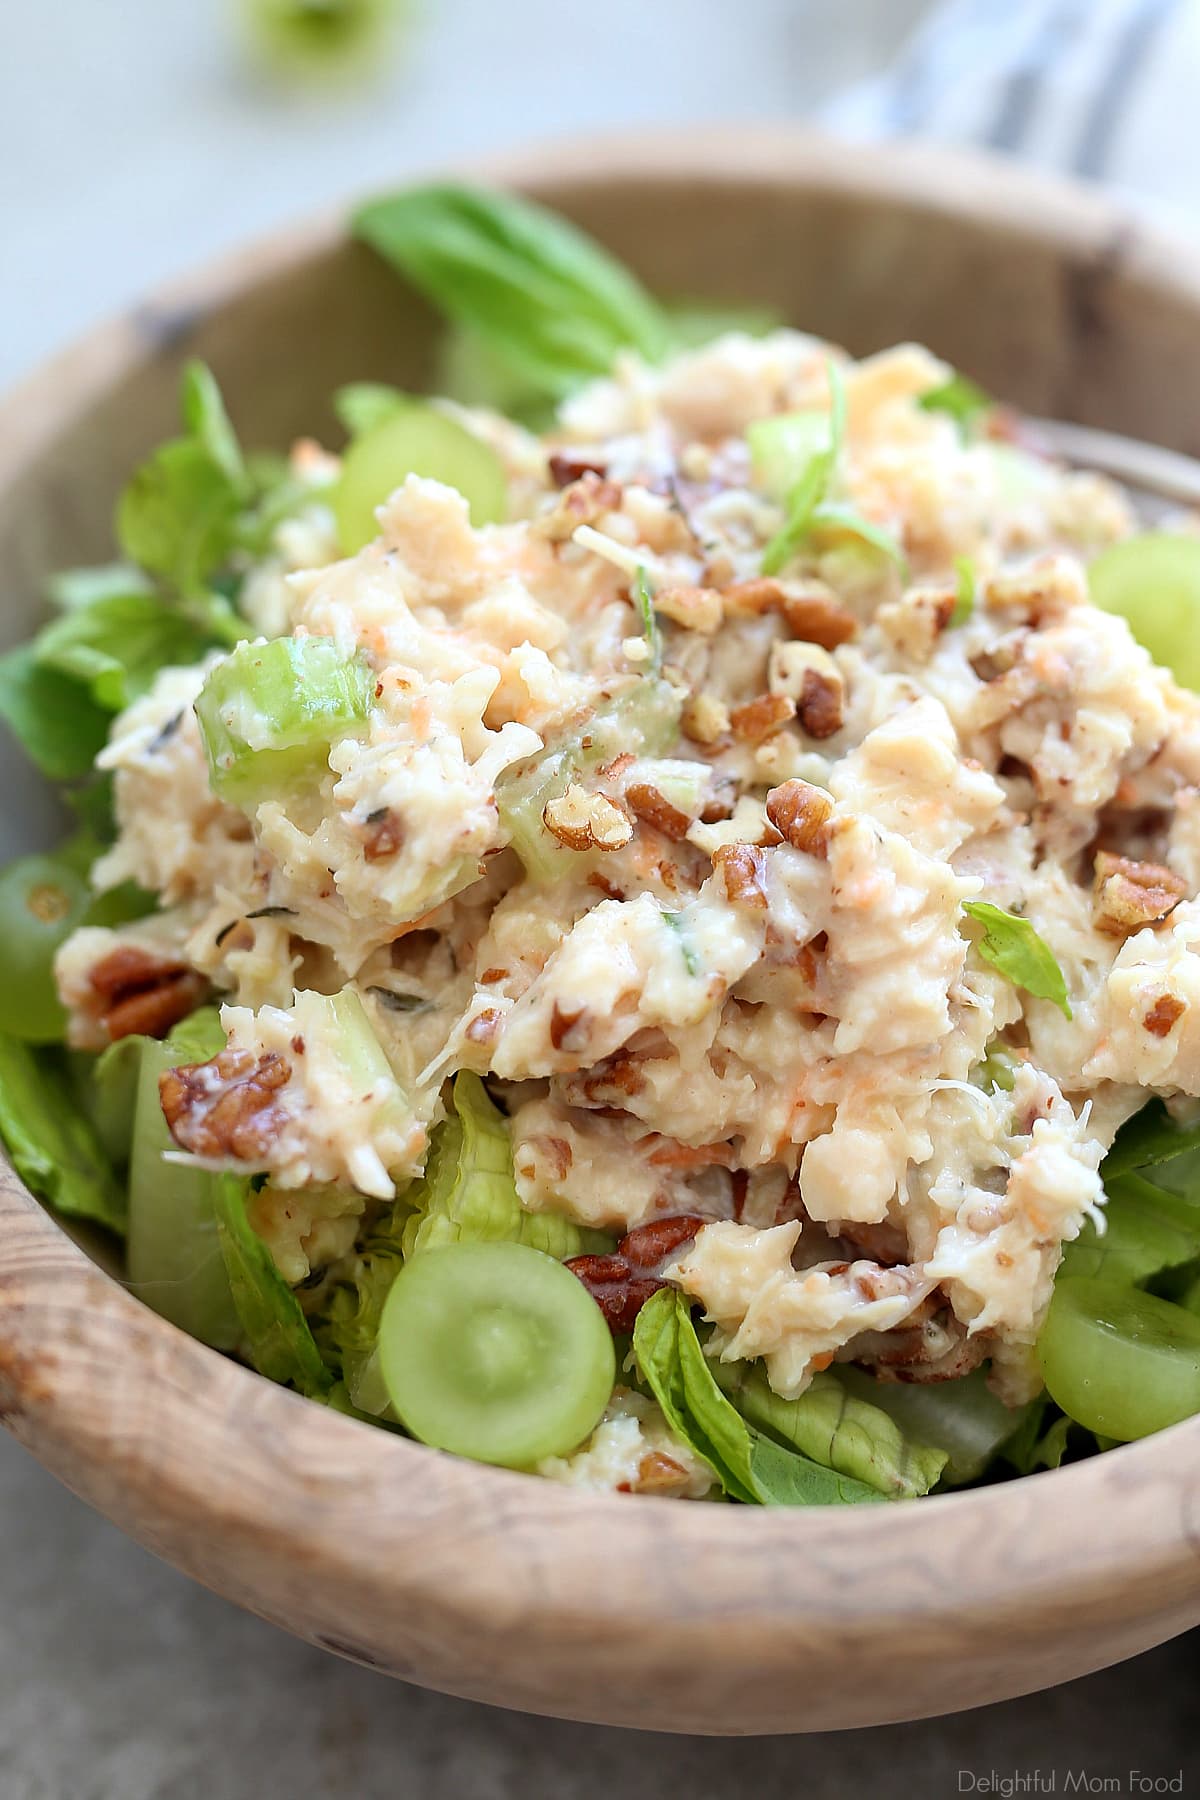 This crunchy and delectable yogurt pecan chicken salad takes less than 10 minutes to assemble, is keto, wholesome with vegetables added, and mouthwatering good! Top this satisfying meal over fresh greens or turned it into a chicken salad wrap with butter lettuce or tortillas. #pecanchickensalad #chickensaladrecipe #healthychickensalad #chicken #pecans #easy #lunch #glutenfree #keto #salad #delightfulmomfood | Recipe at Delightful Mom Food